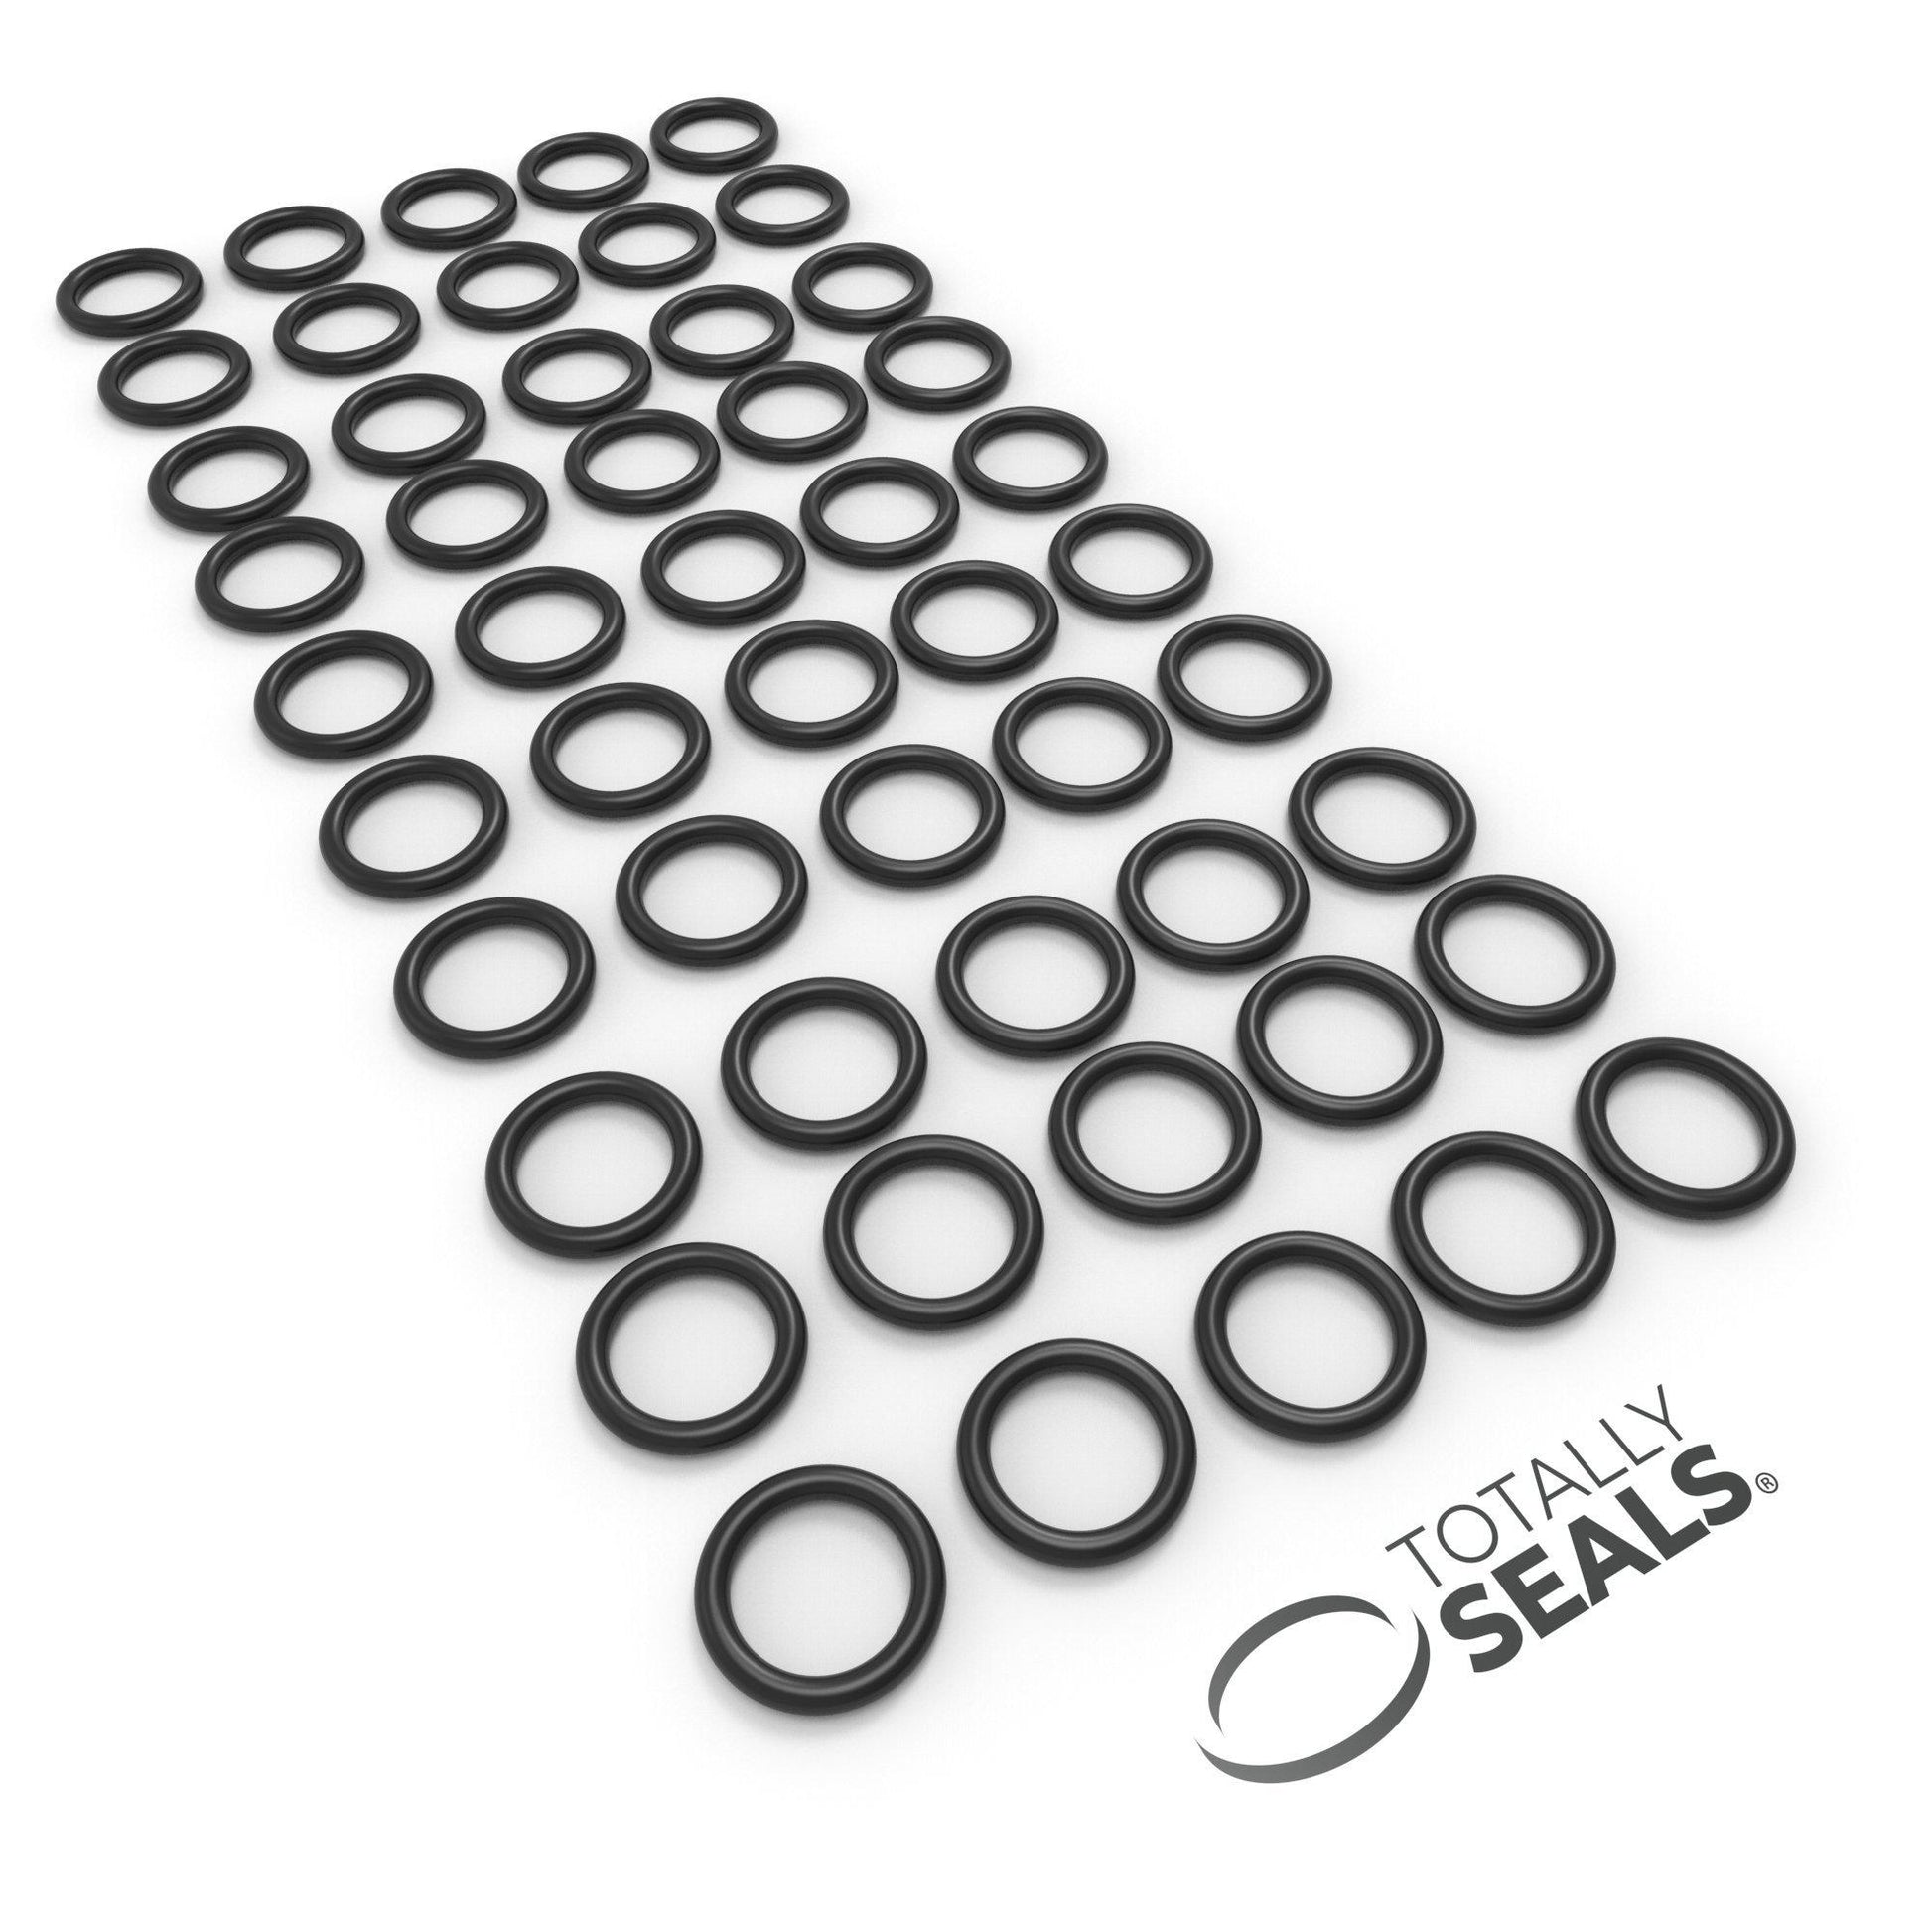 35mm x 1mm (37mm OD) Nitrile O-Rings - Totally Seals®